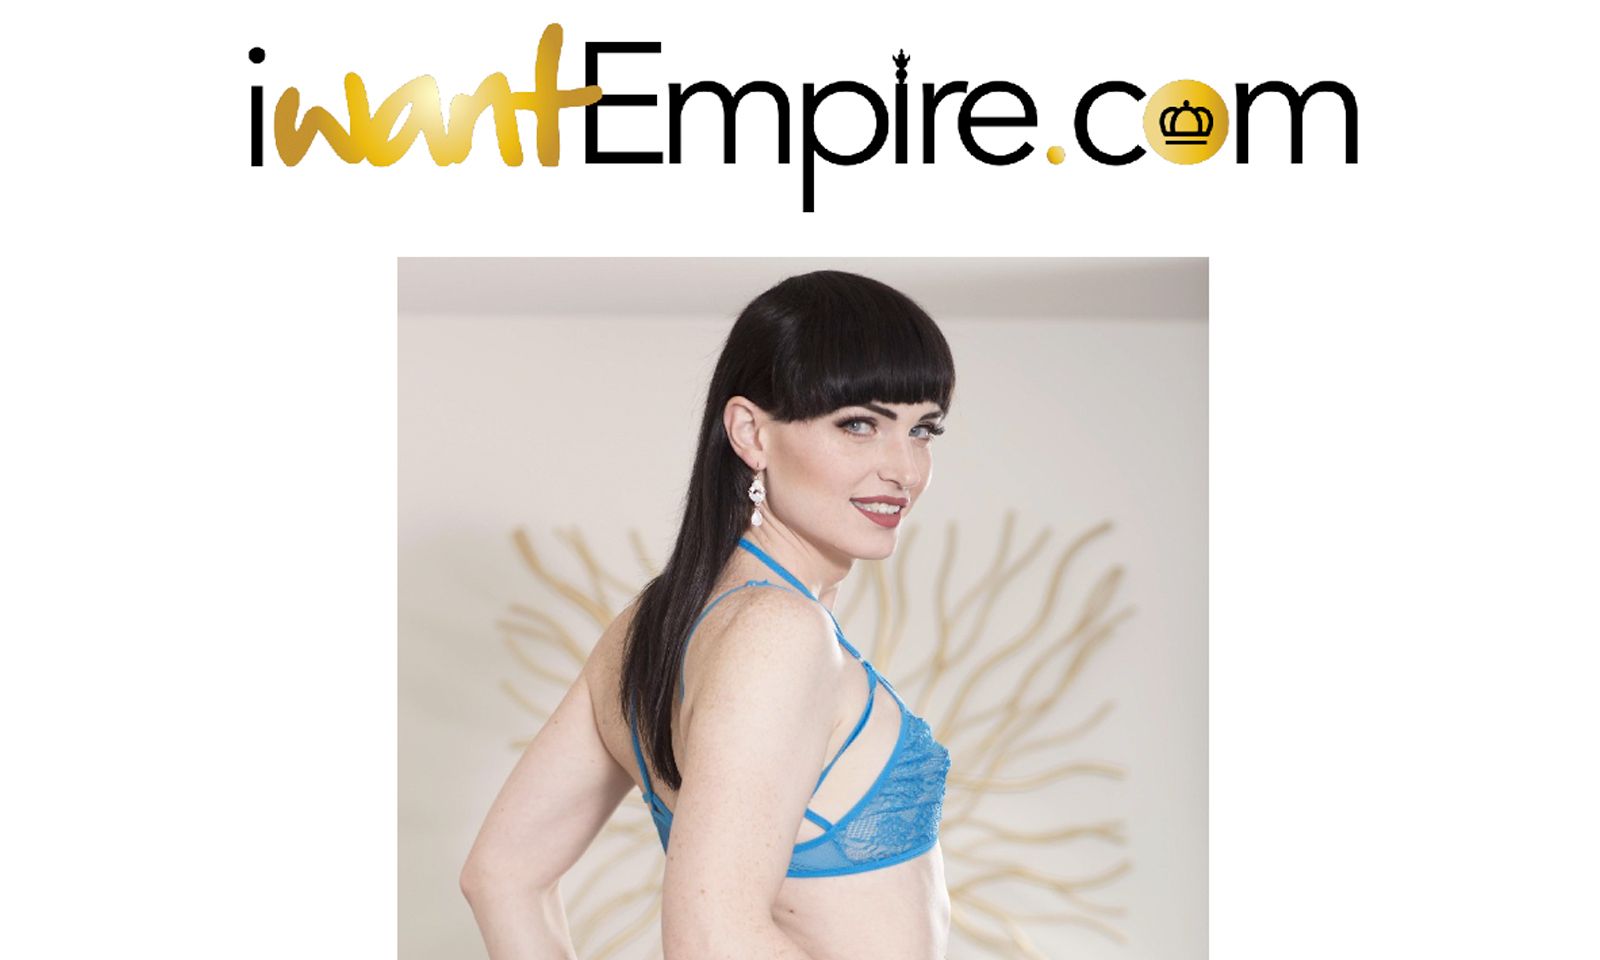 Natalie Mars Launches iWantNatalieMars.com with iWantEmpire